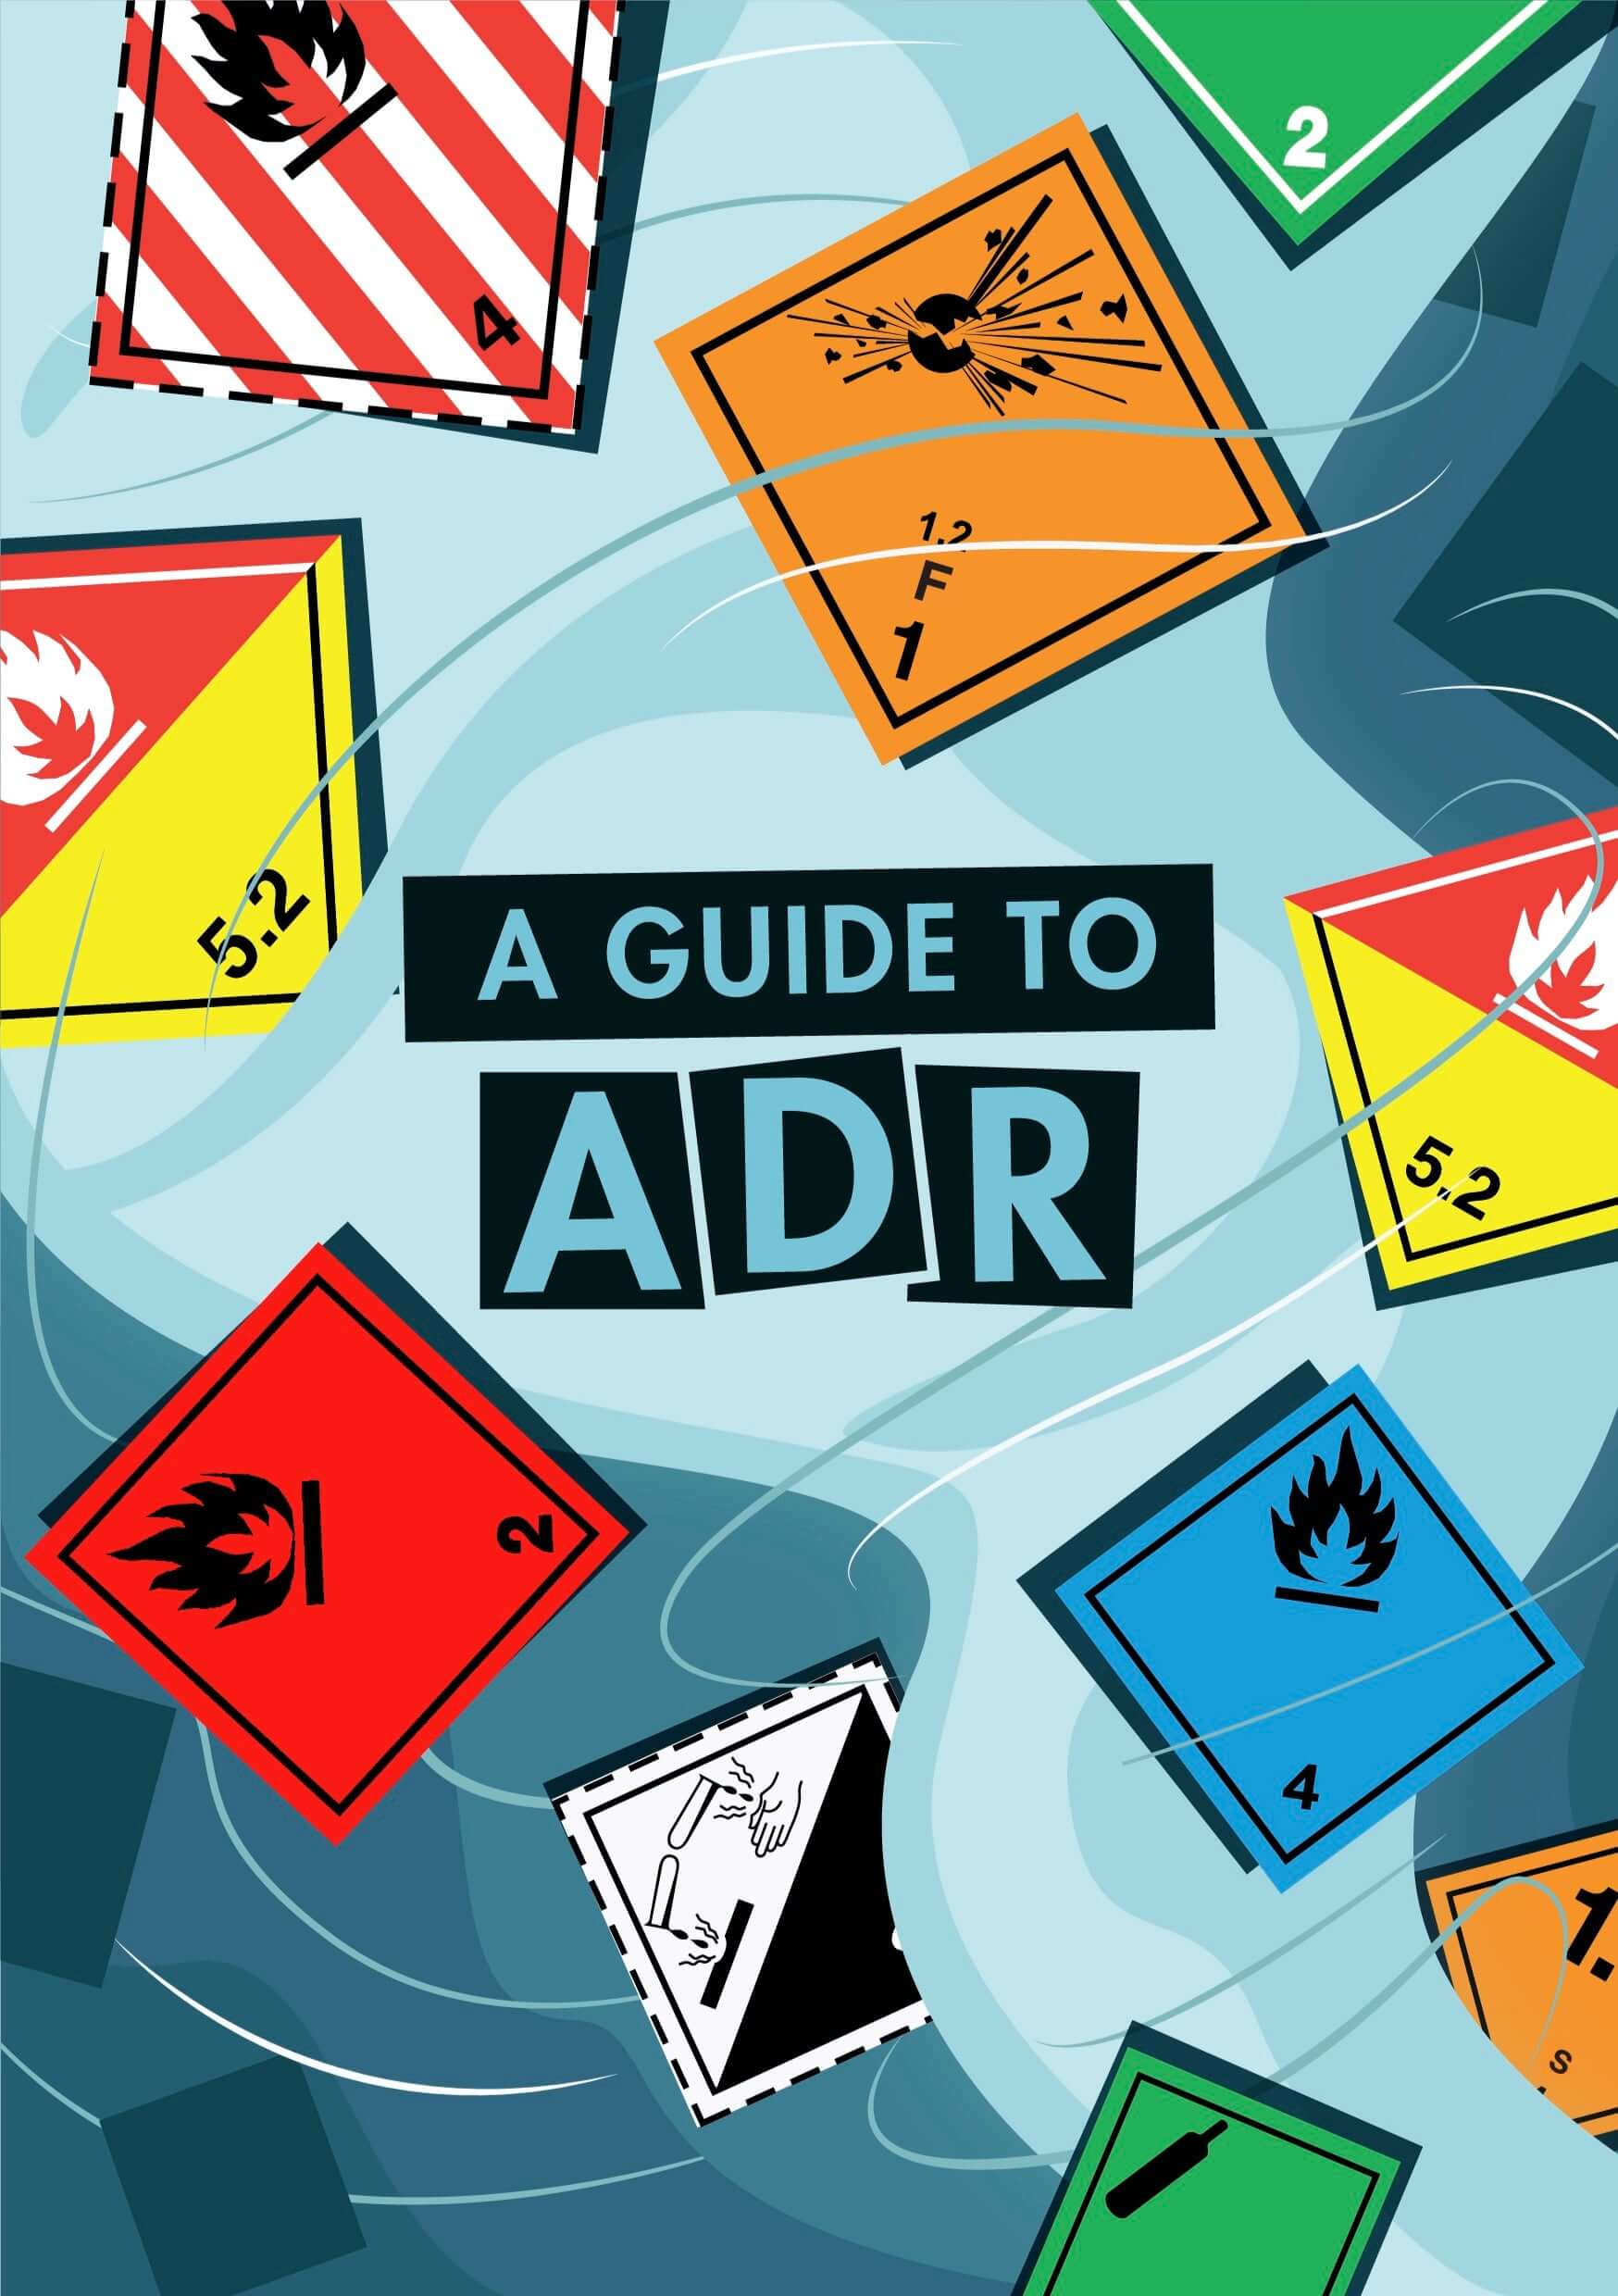 Included course handbook for ADR awareness training